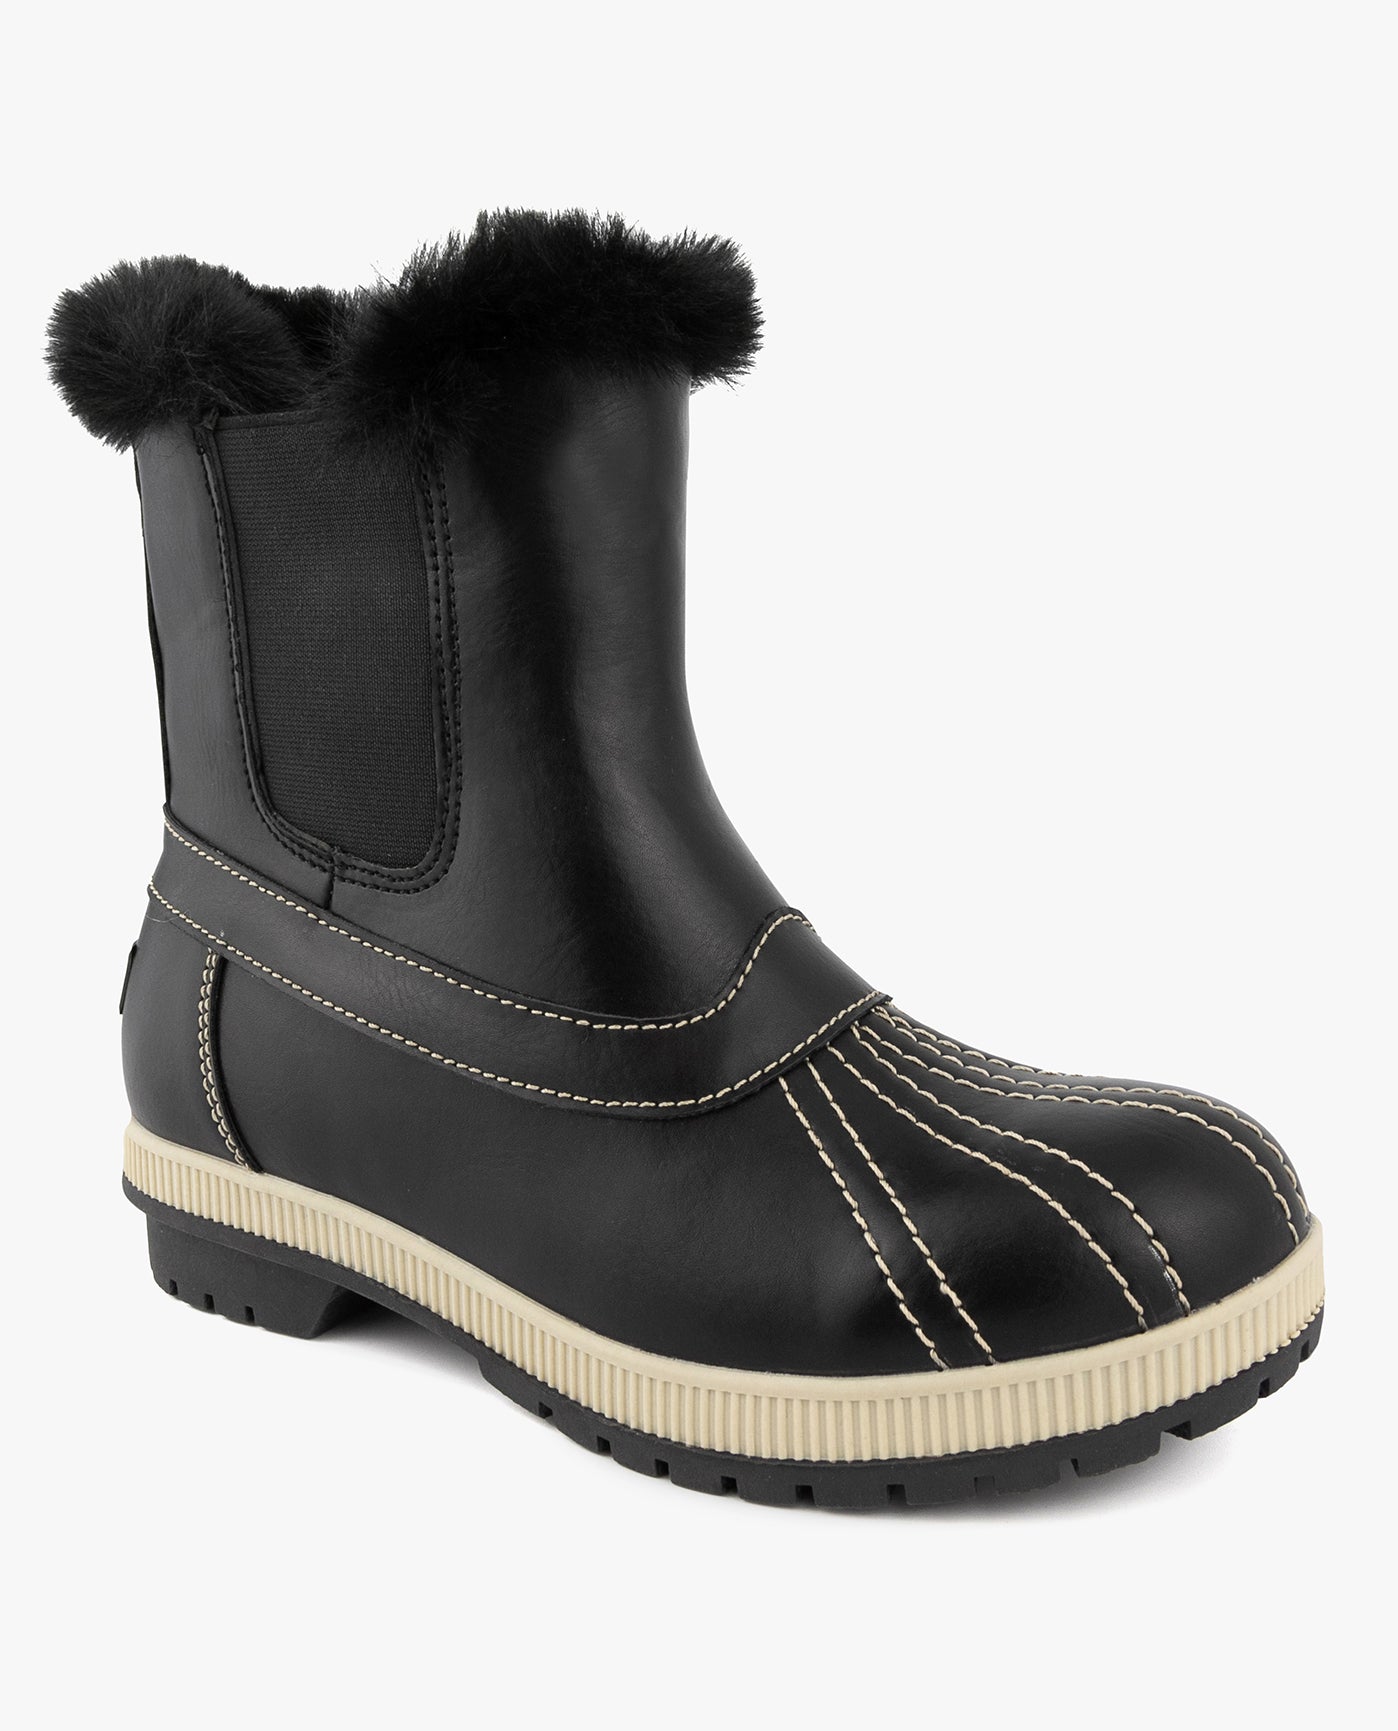 MAIN IMAGE OF WOMENS MILDRED SHORT WINTER BOOT | ESO_BLACK_001